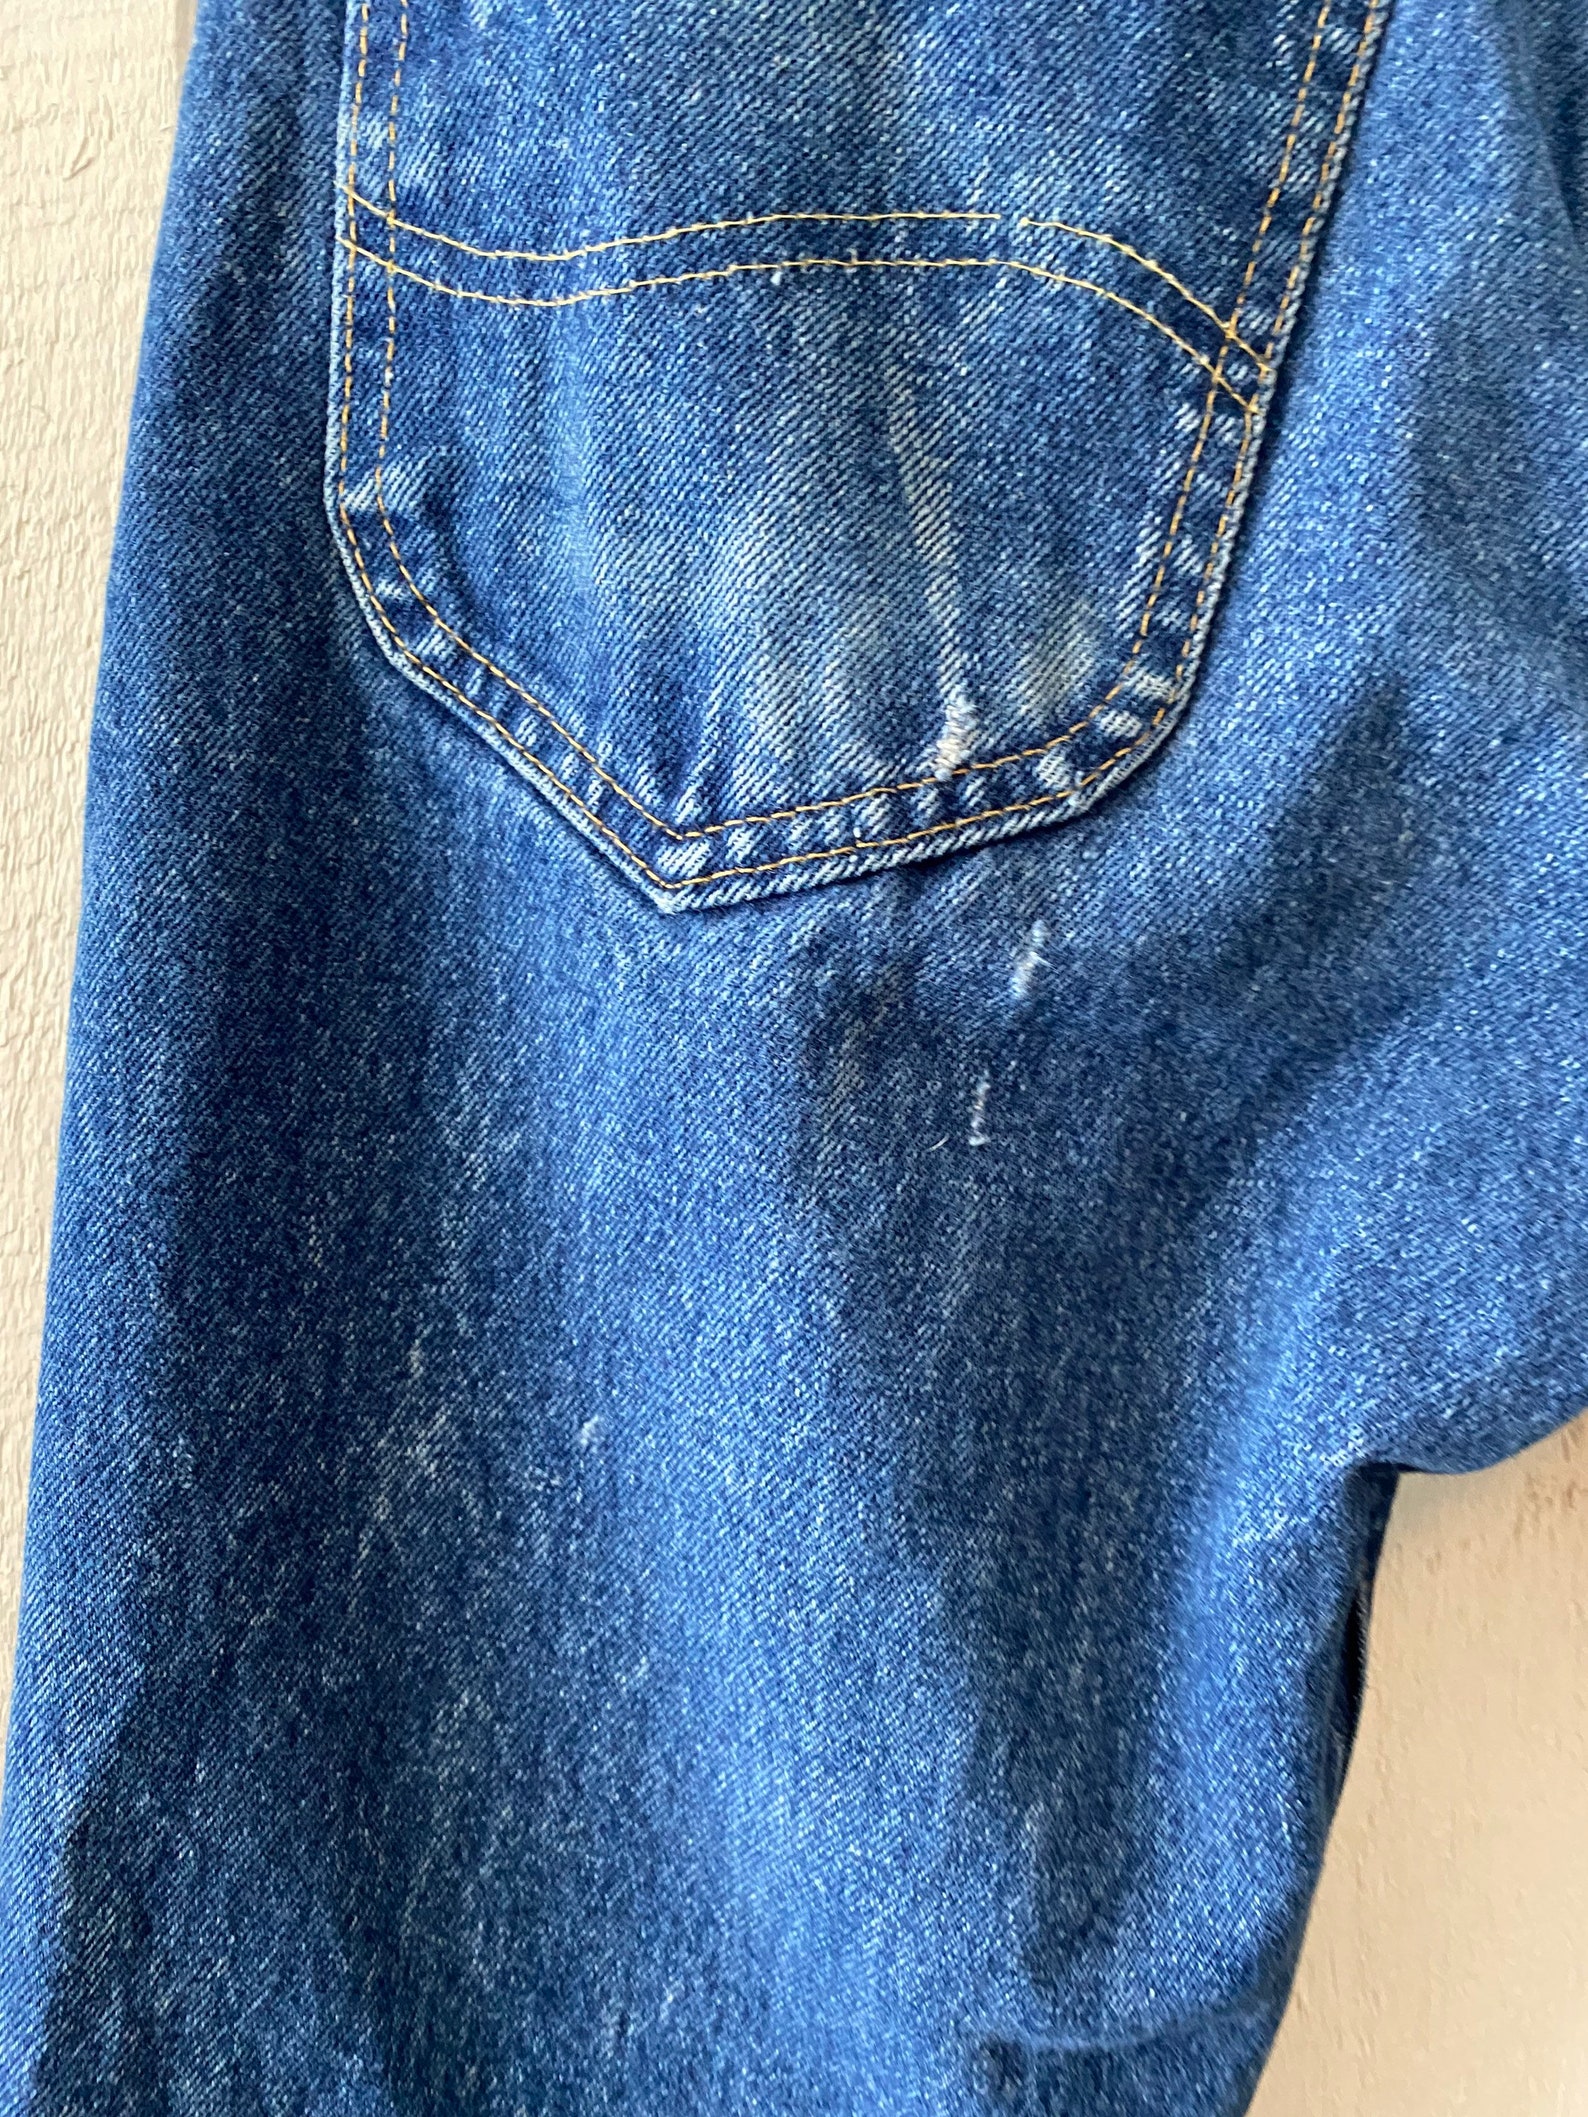 Vintage 80s Navy Blue Stone Wash Denim Jeans by Lee Riders 30 | Etsy